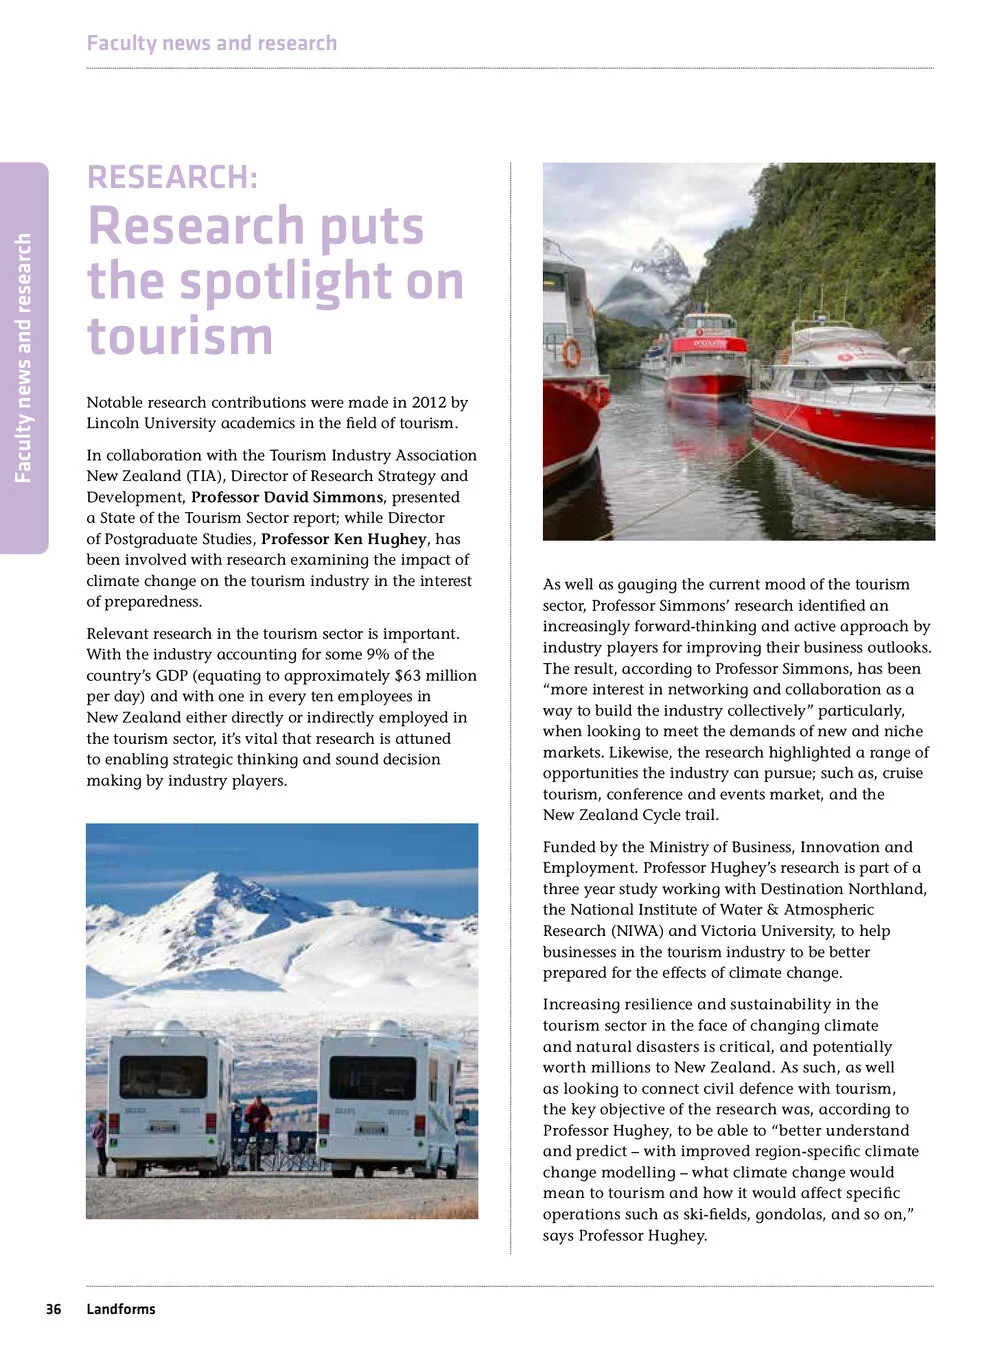 Research puts the spotlight on tourism